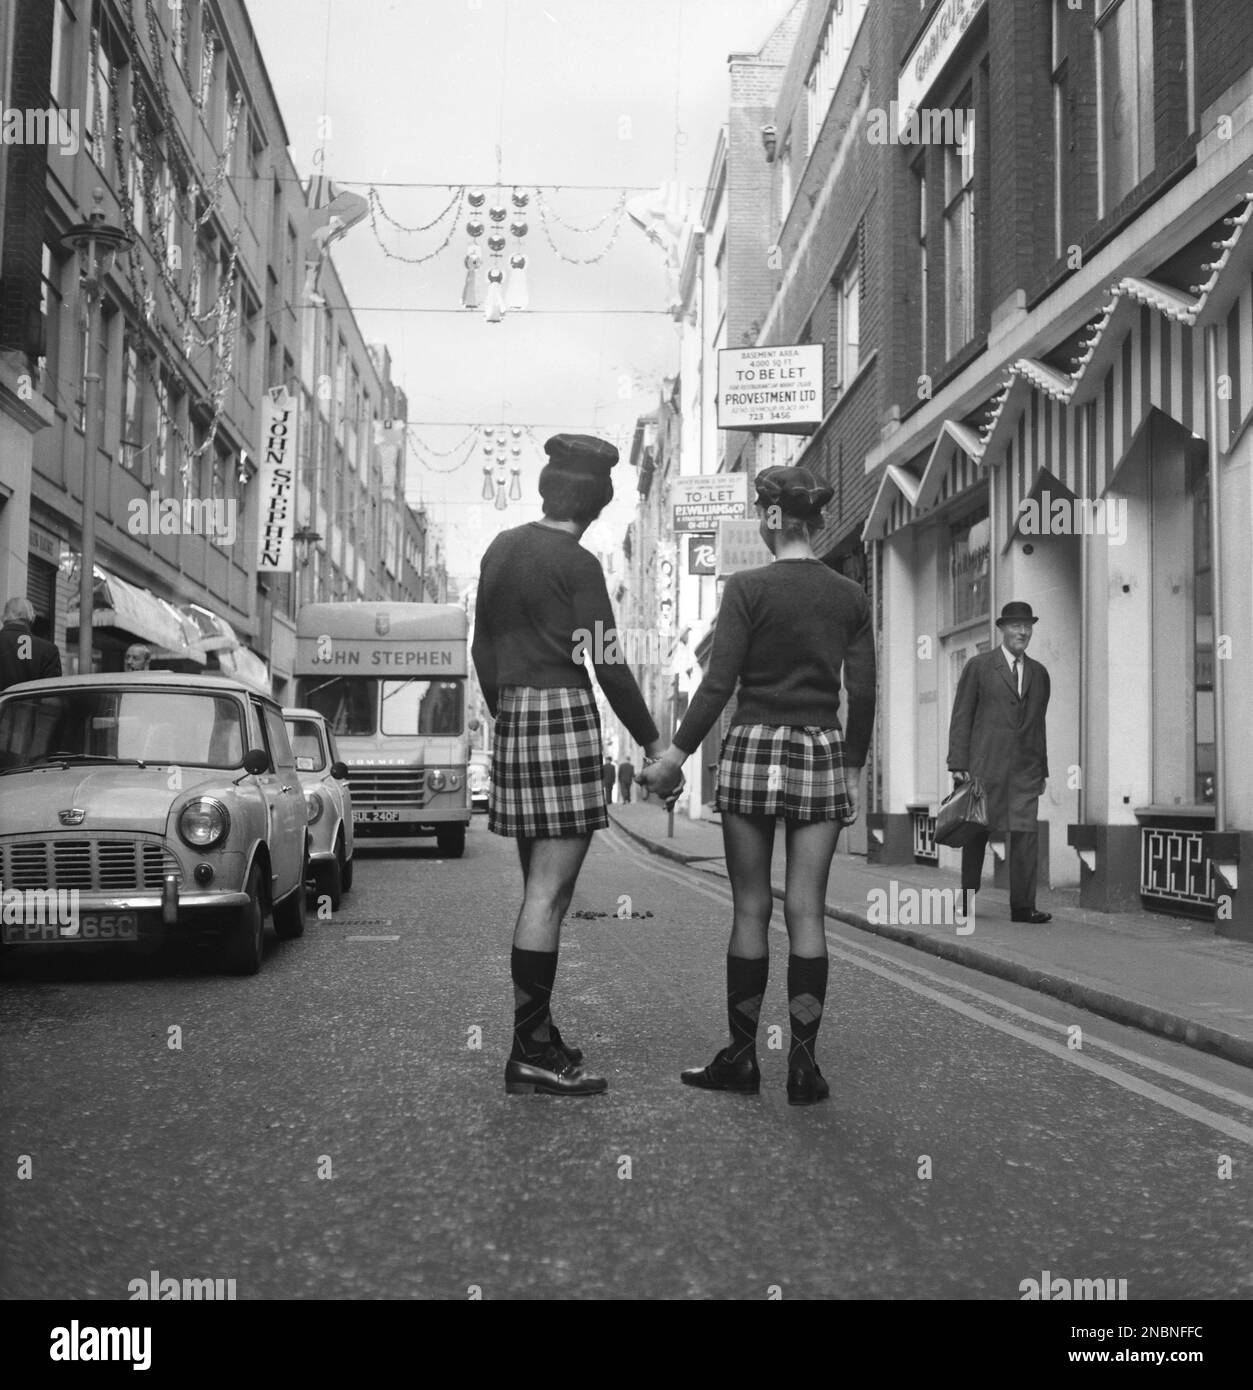 A man and woman posing in identical outfits of jumper and skirt in fashionable Carnaby Street, London 1968.   Photo by Tony Henshaw Archive Stock Photo